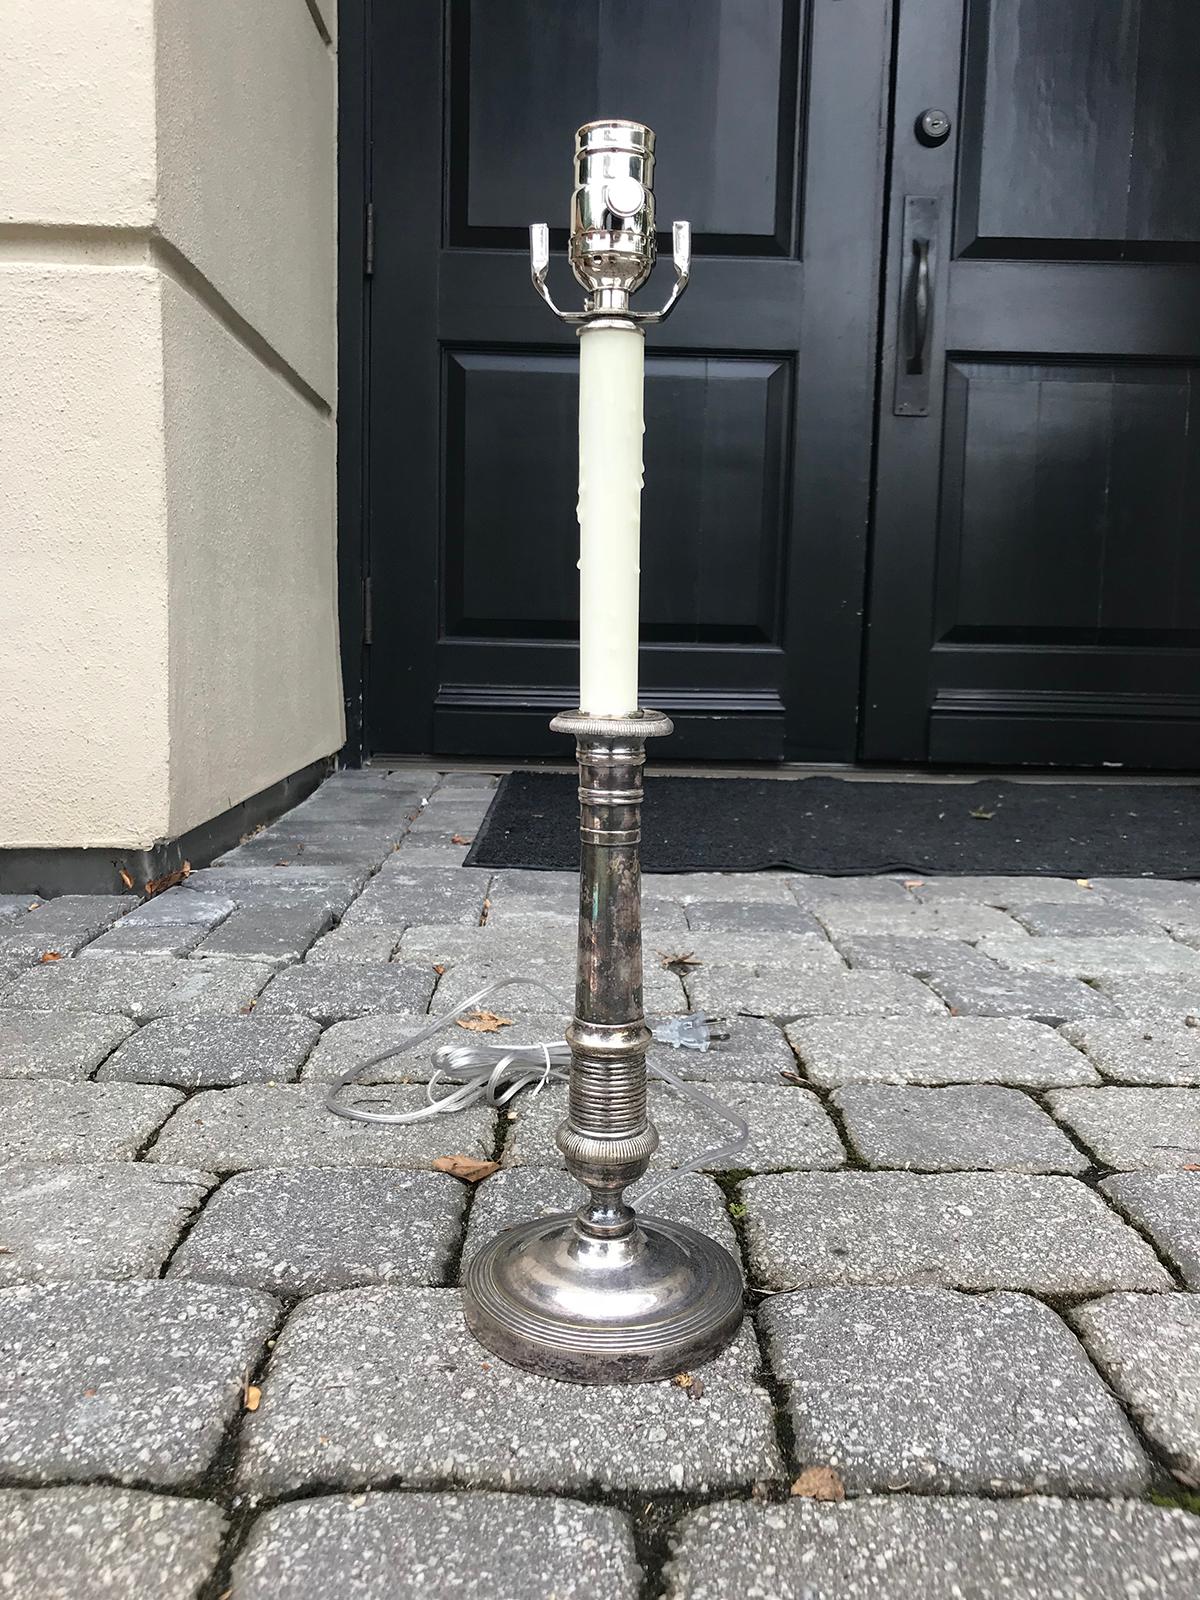 19th-20th century silver candlestick as lamp
New wiring.